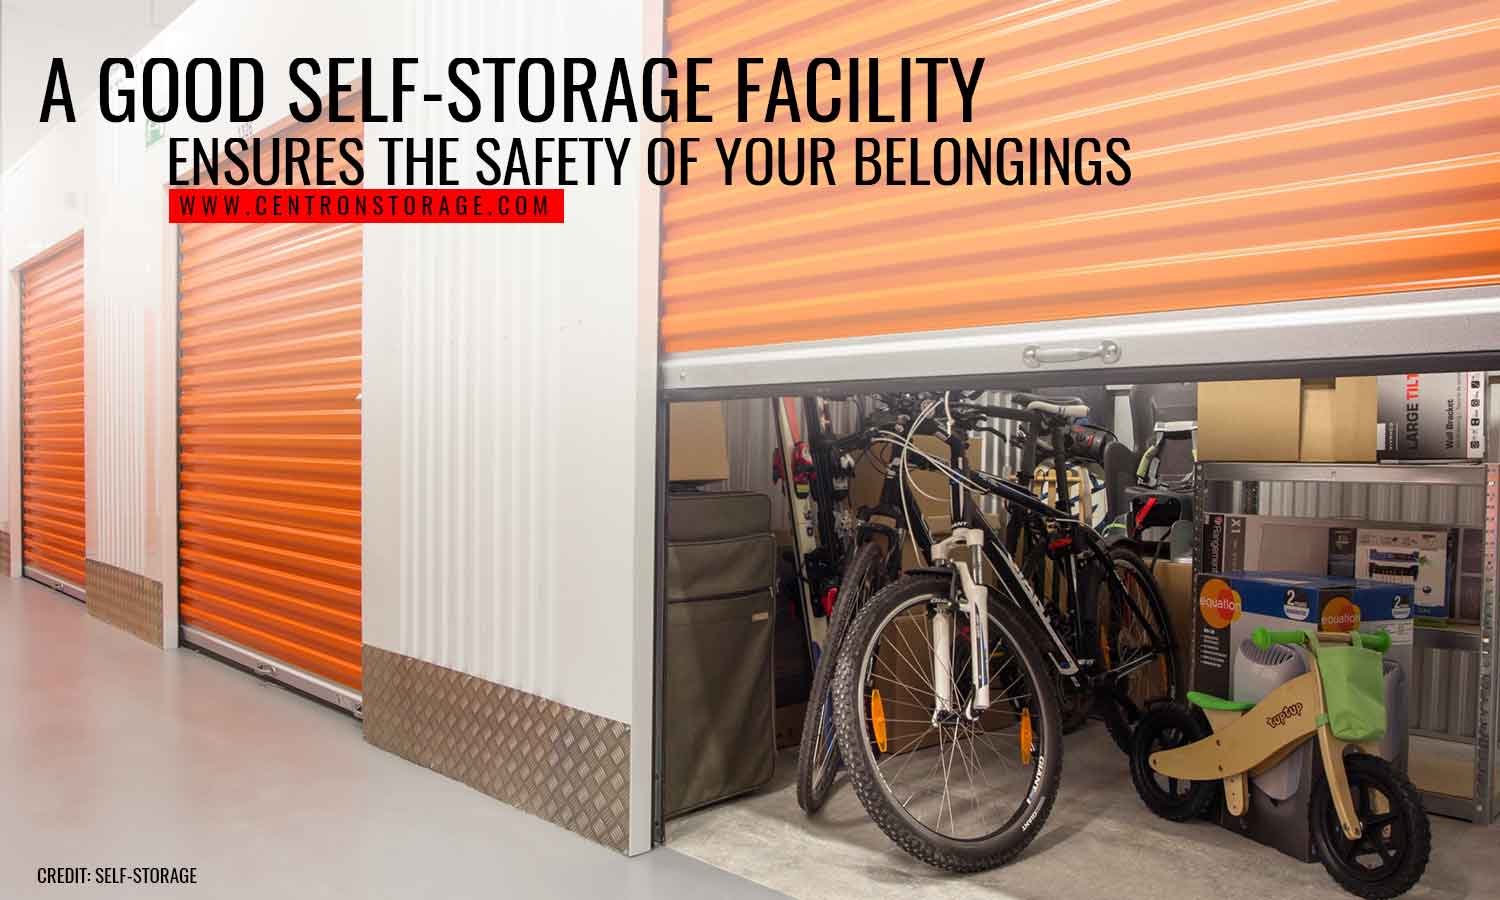 A good self-storage facility ensures the safety of your belongings